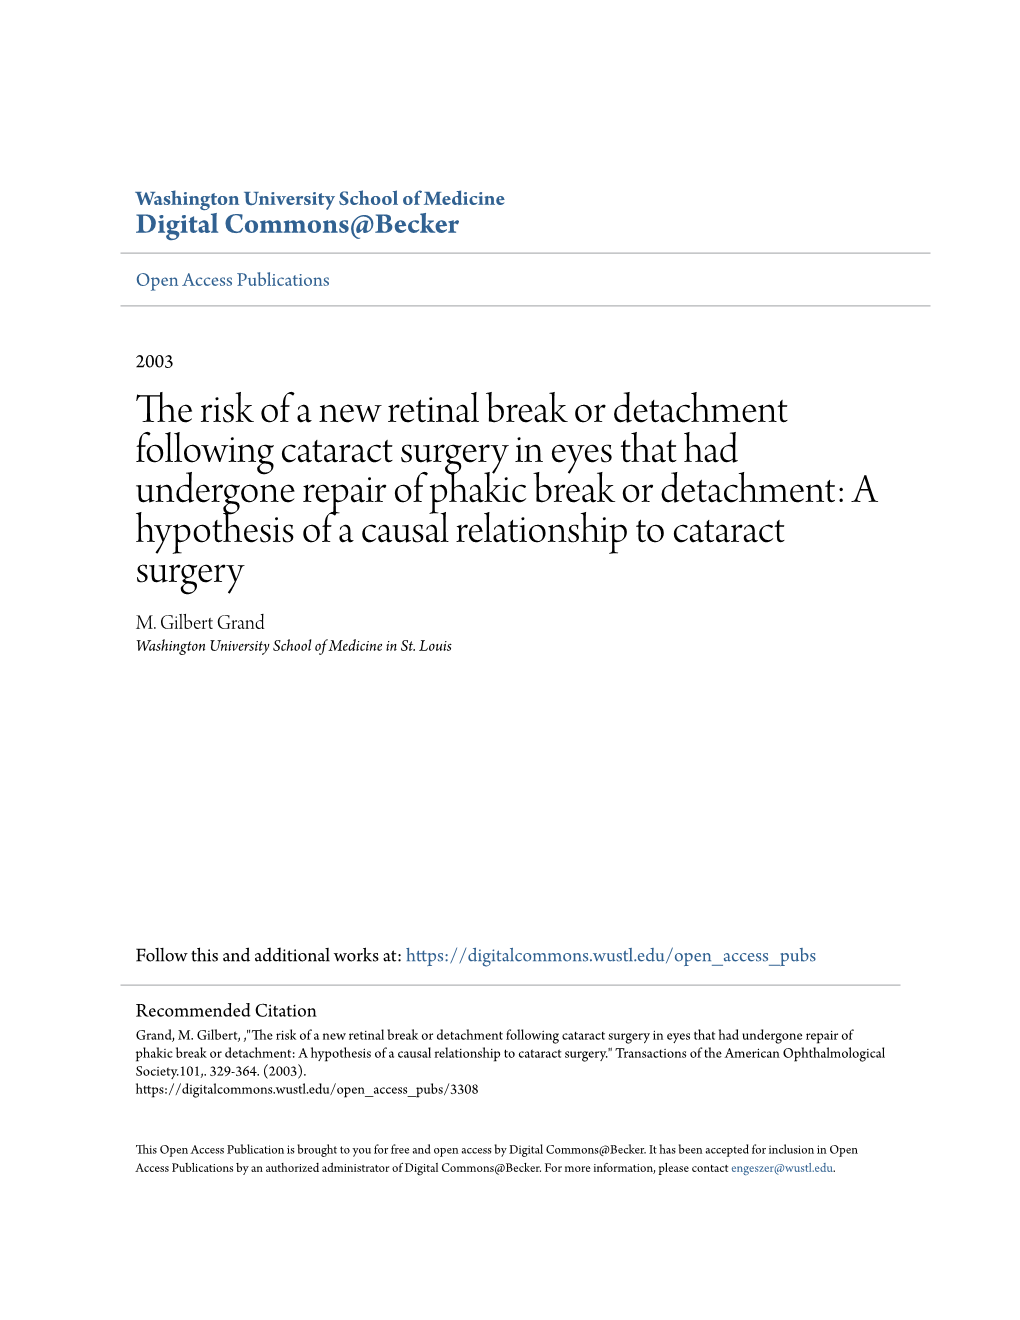 The Risk of a New Retinal Break Or Detachment Following Cataract